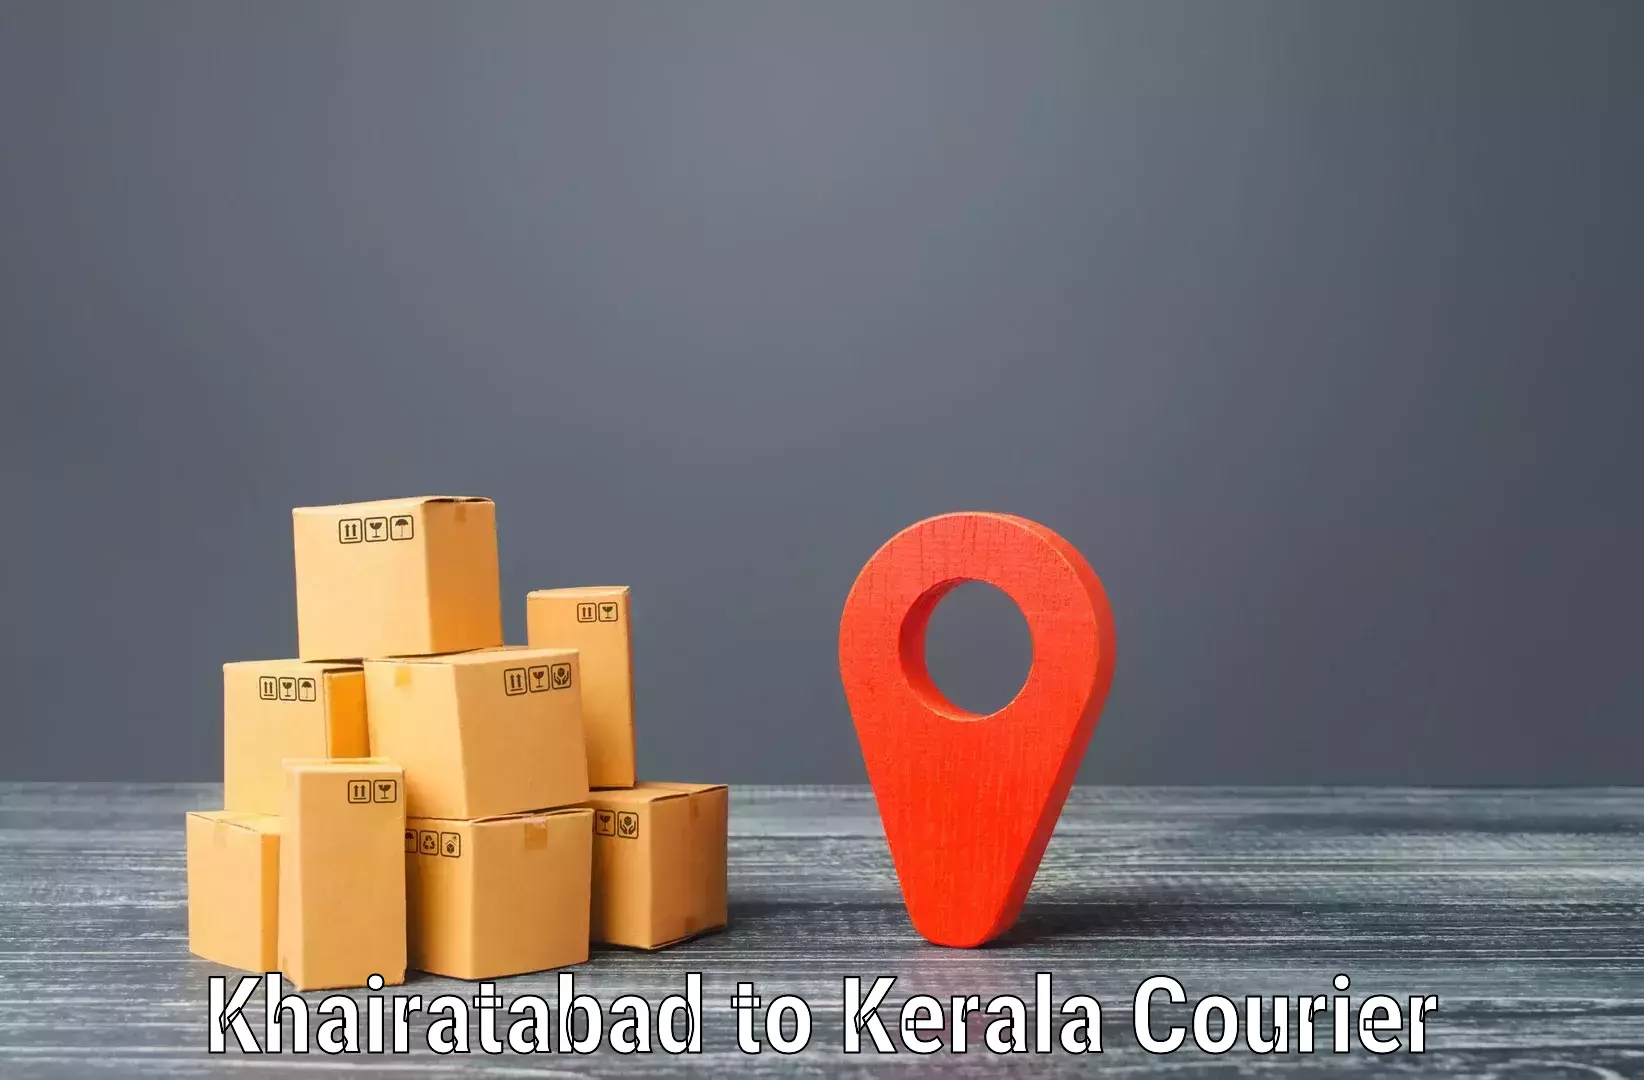 Courier service booking Khairatabad to Anjumoorthy